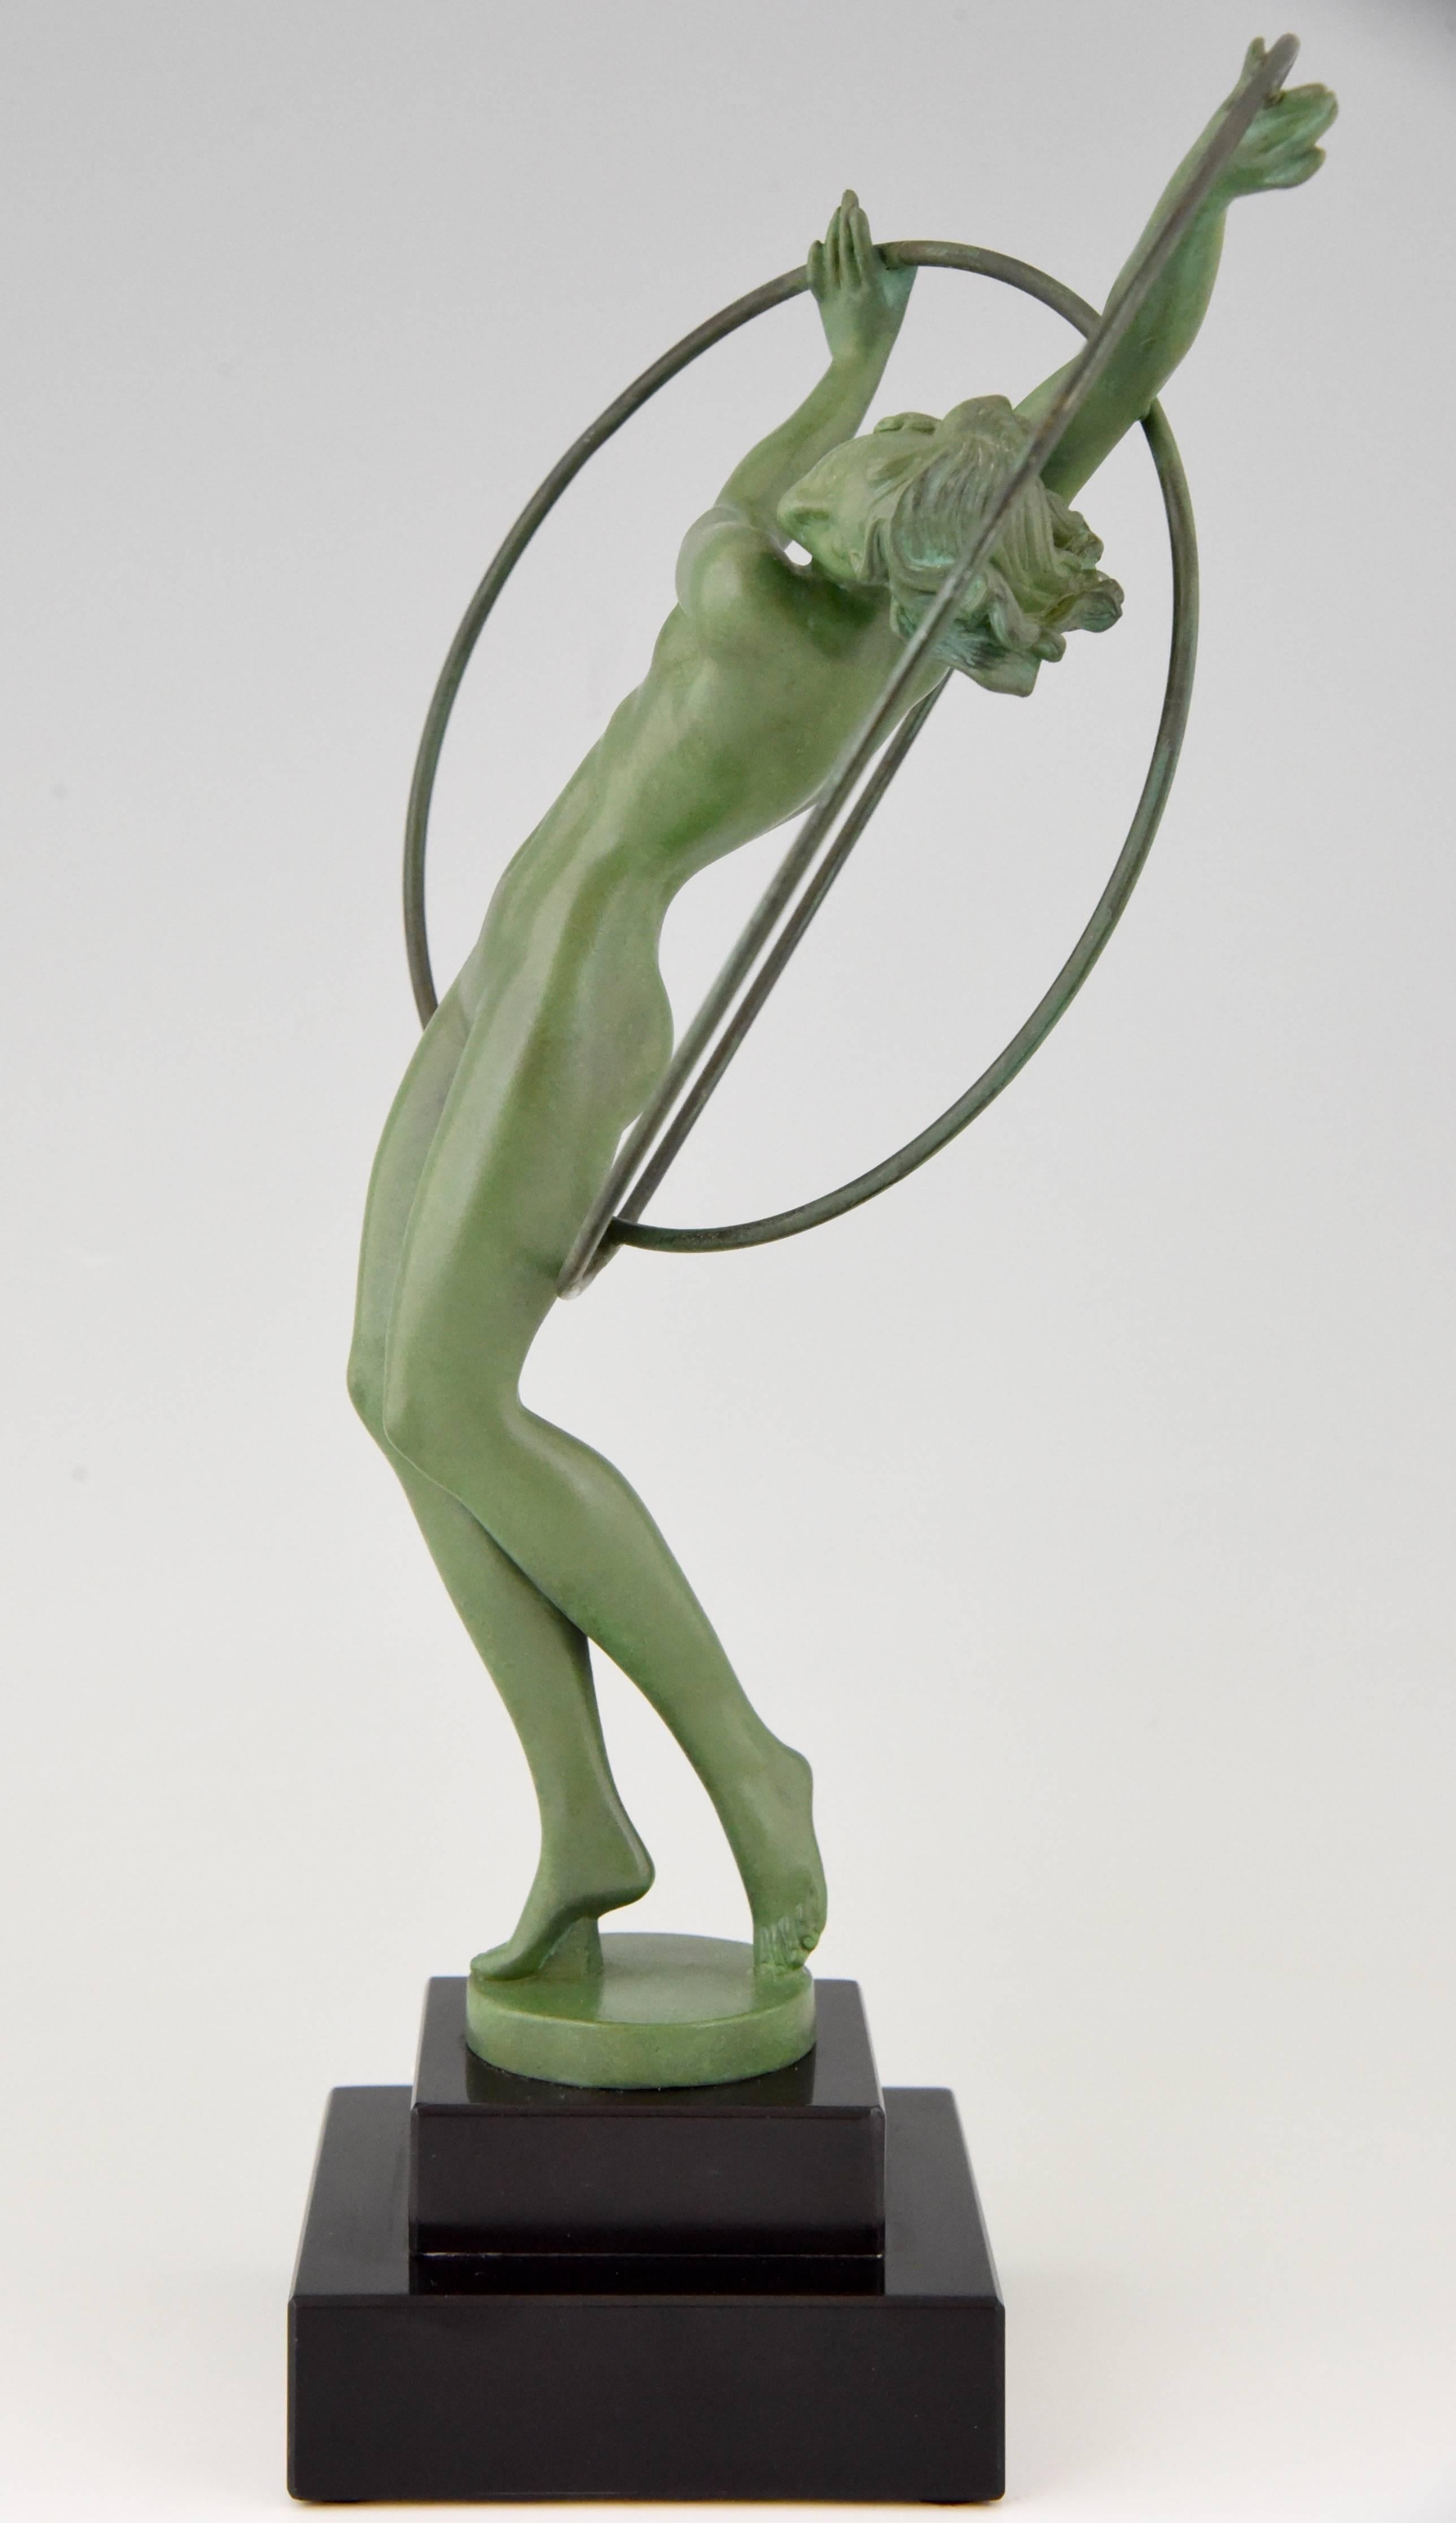 20th Century French Art Deco Sculpture Nude Hoop Dancer by Fayral, Pierre Le Faguays, 1930